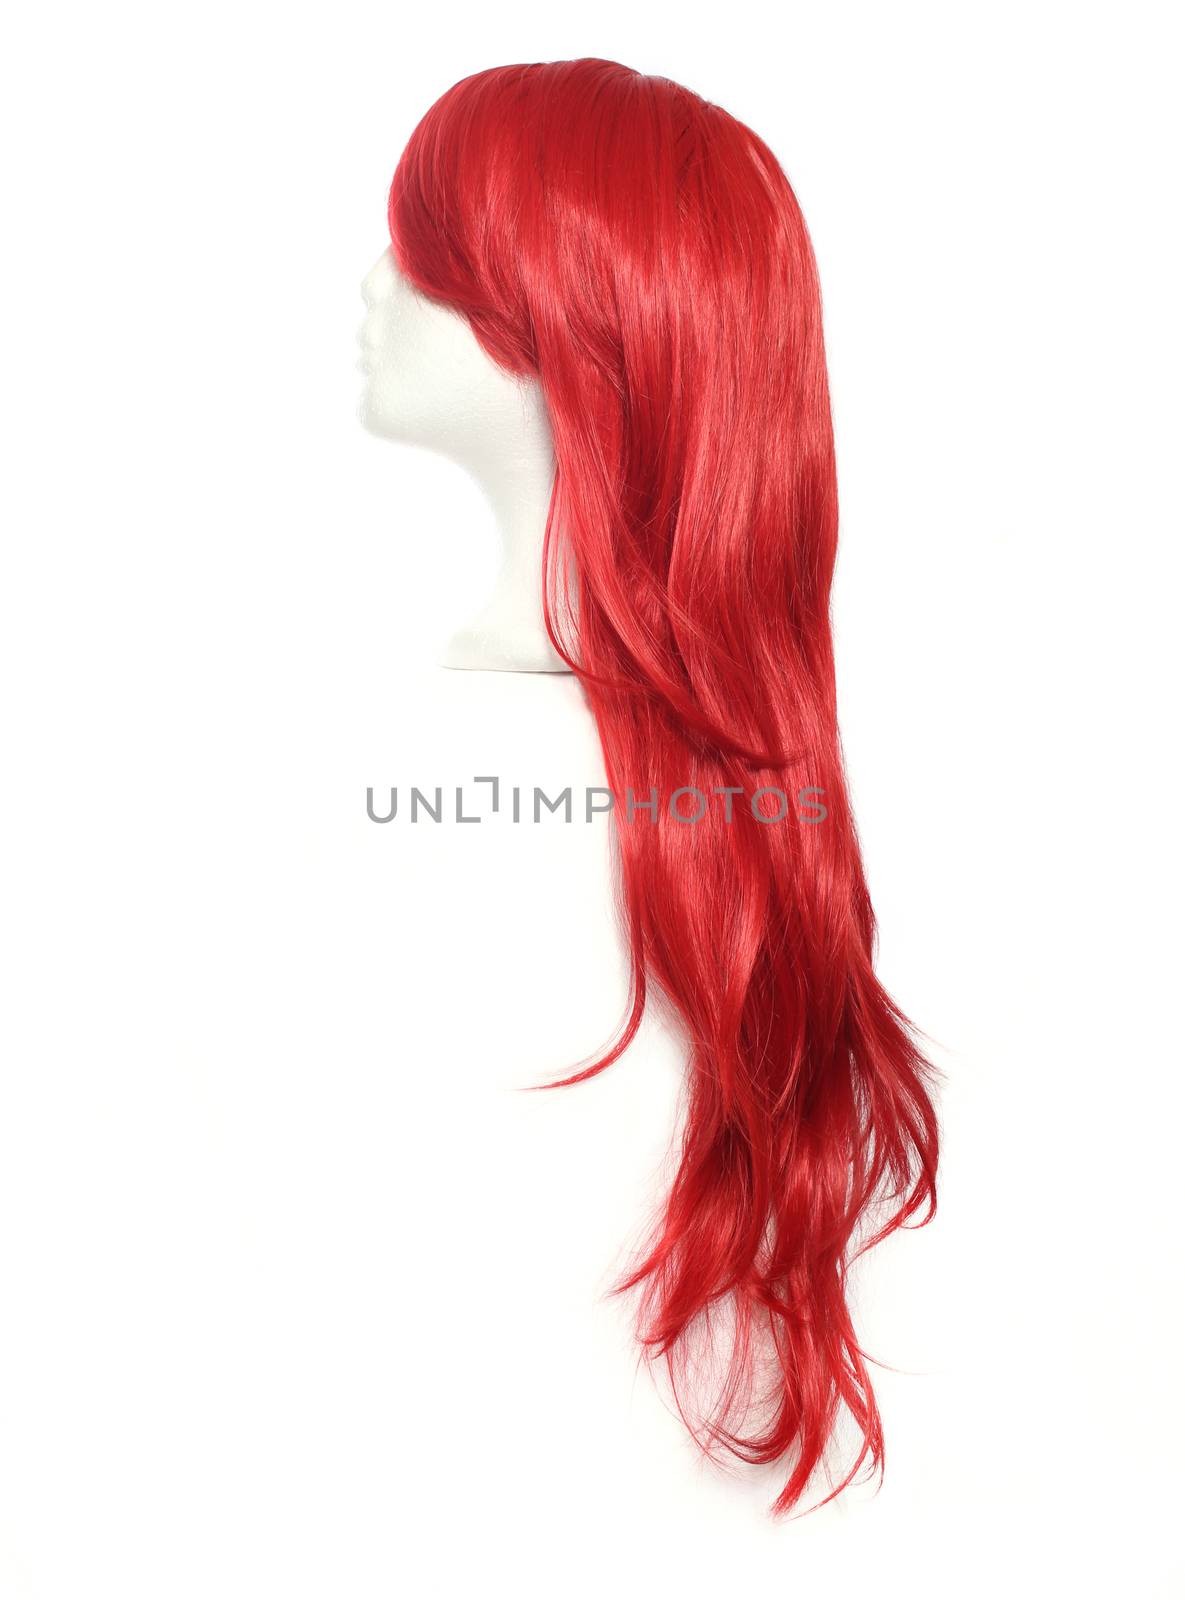 Red Wig on mannequin head isolated on white background